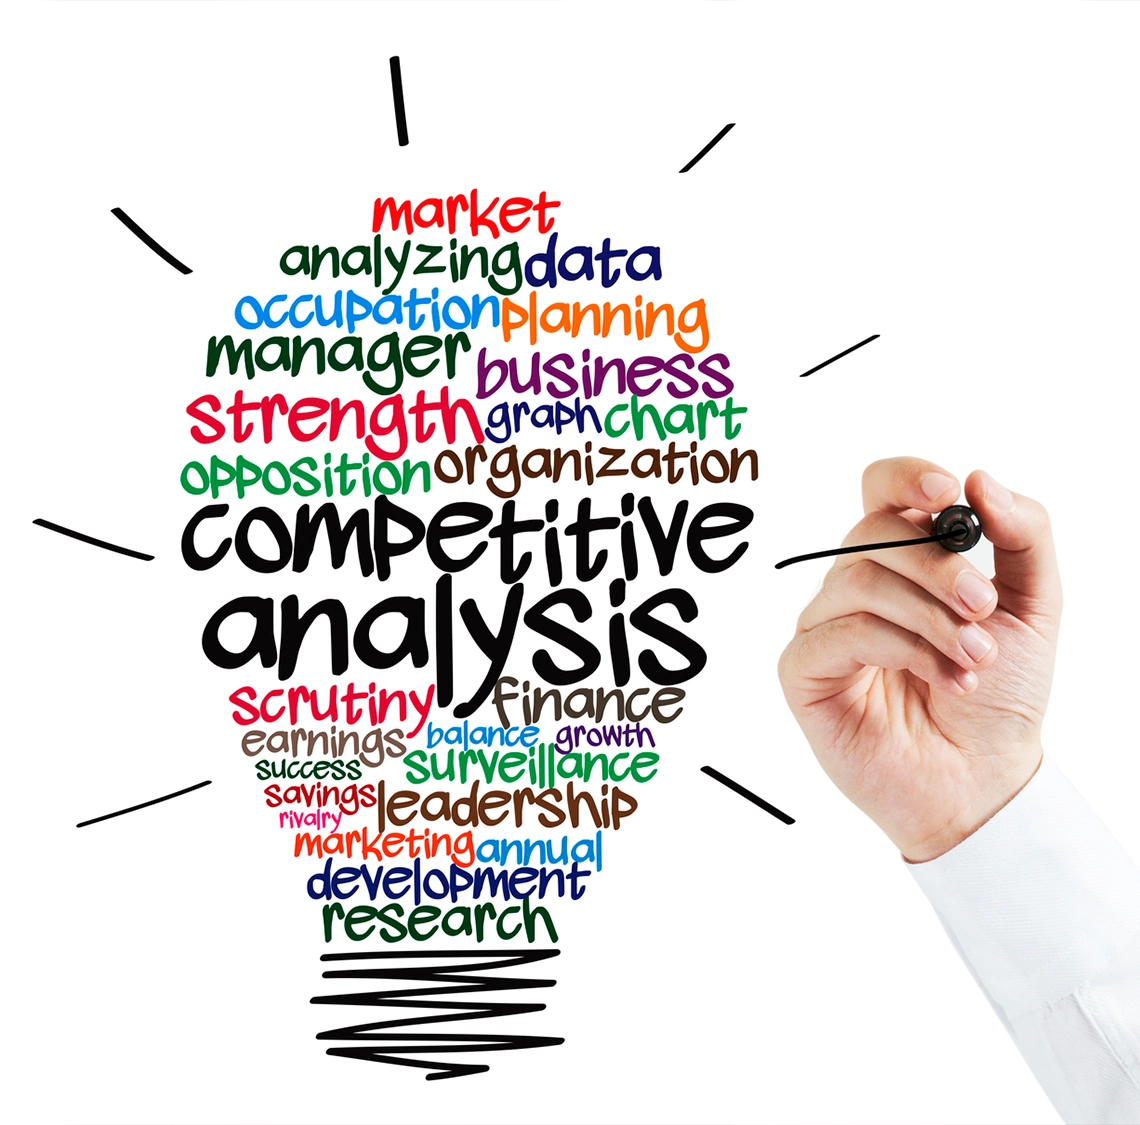 How do you analyze your competitors thoughtfully?